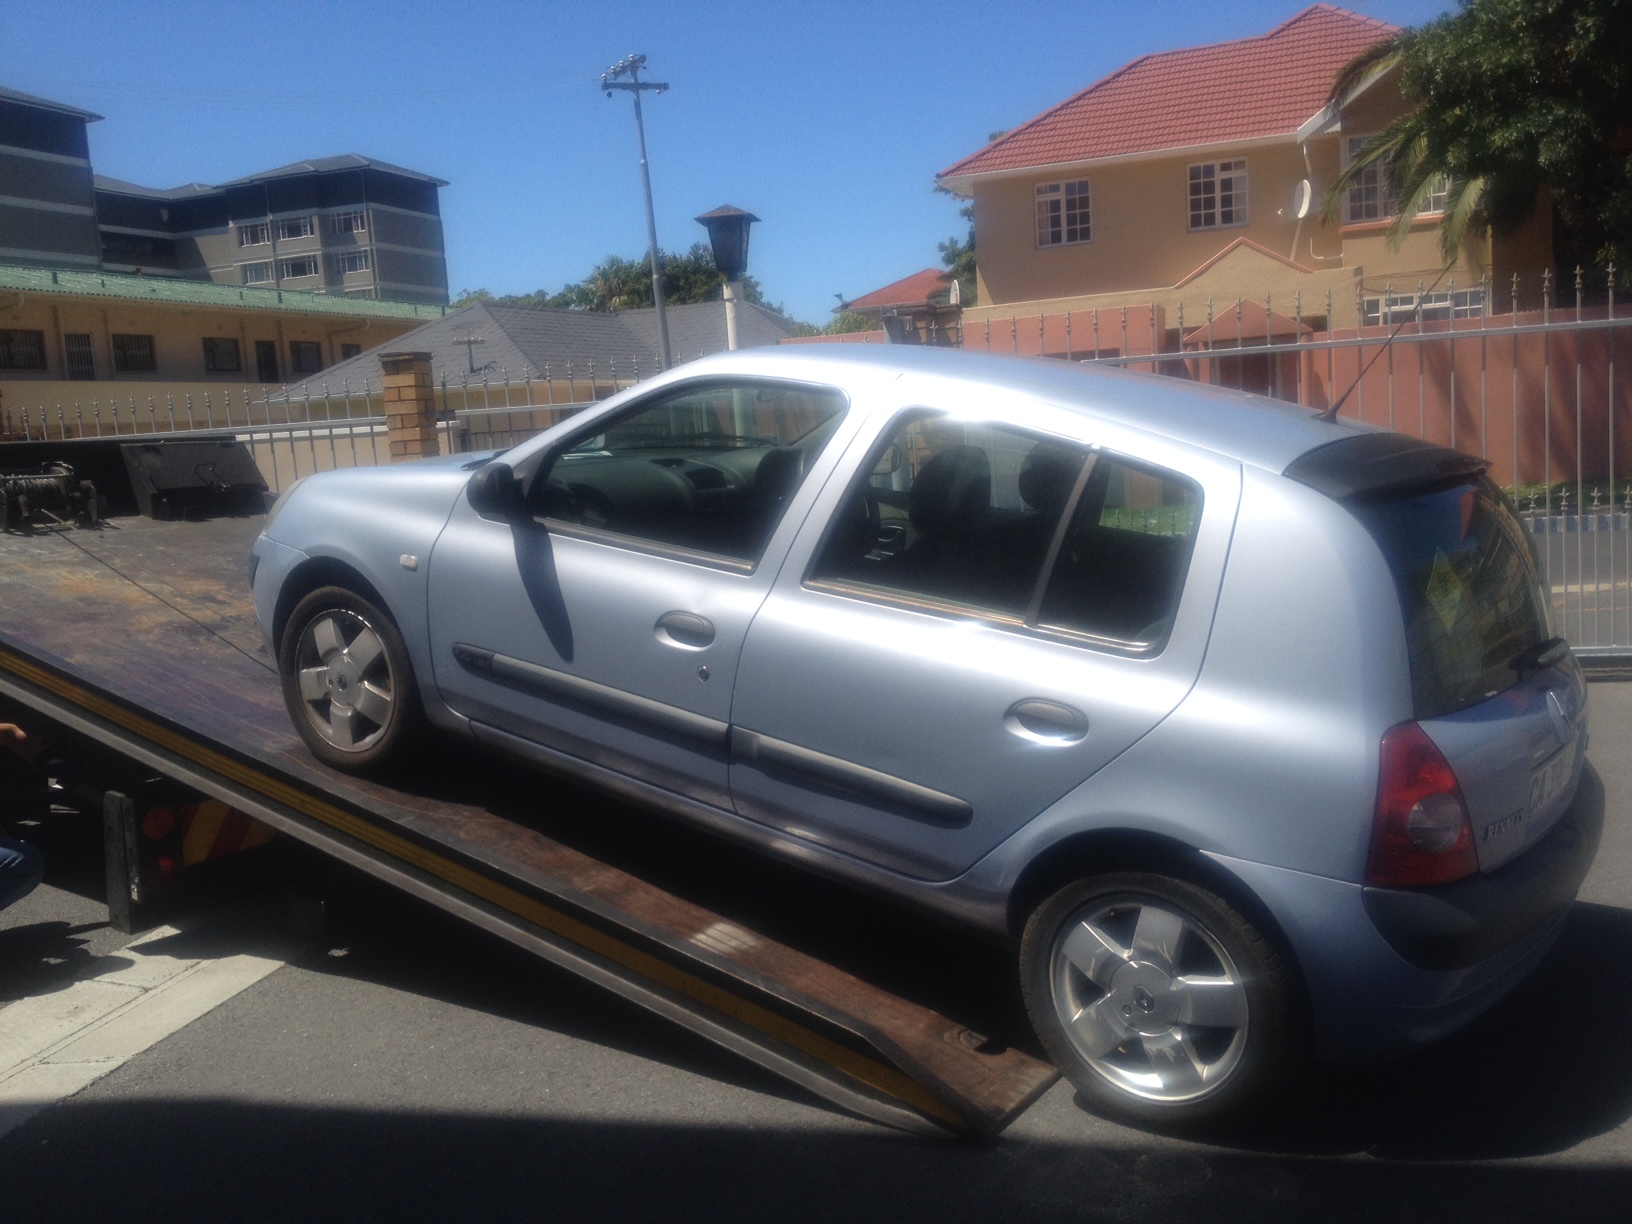 Southern Suburbs Surrender – An average Monday Commute